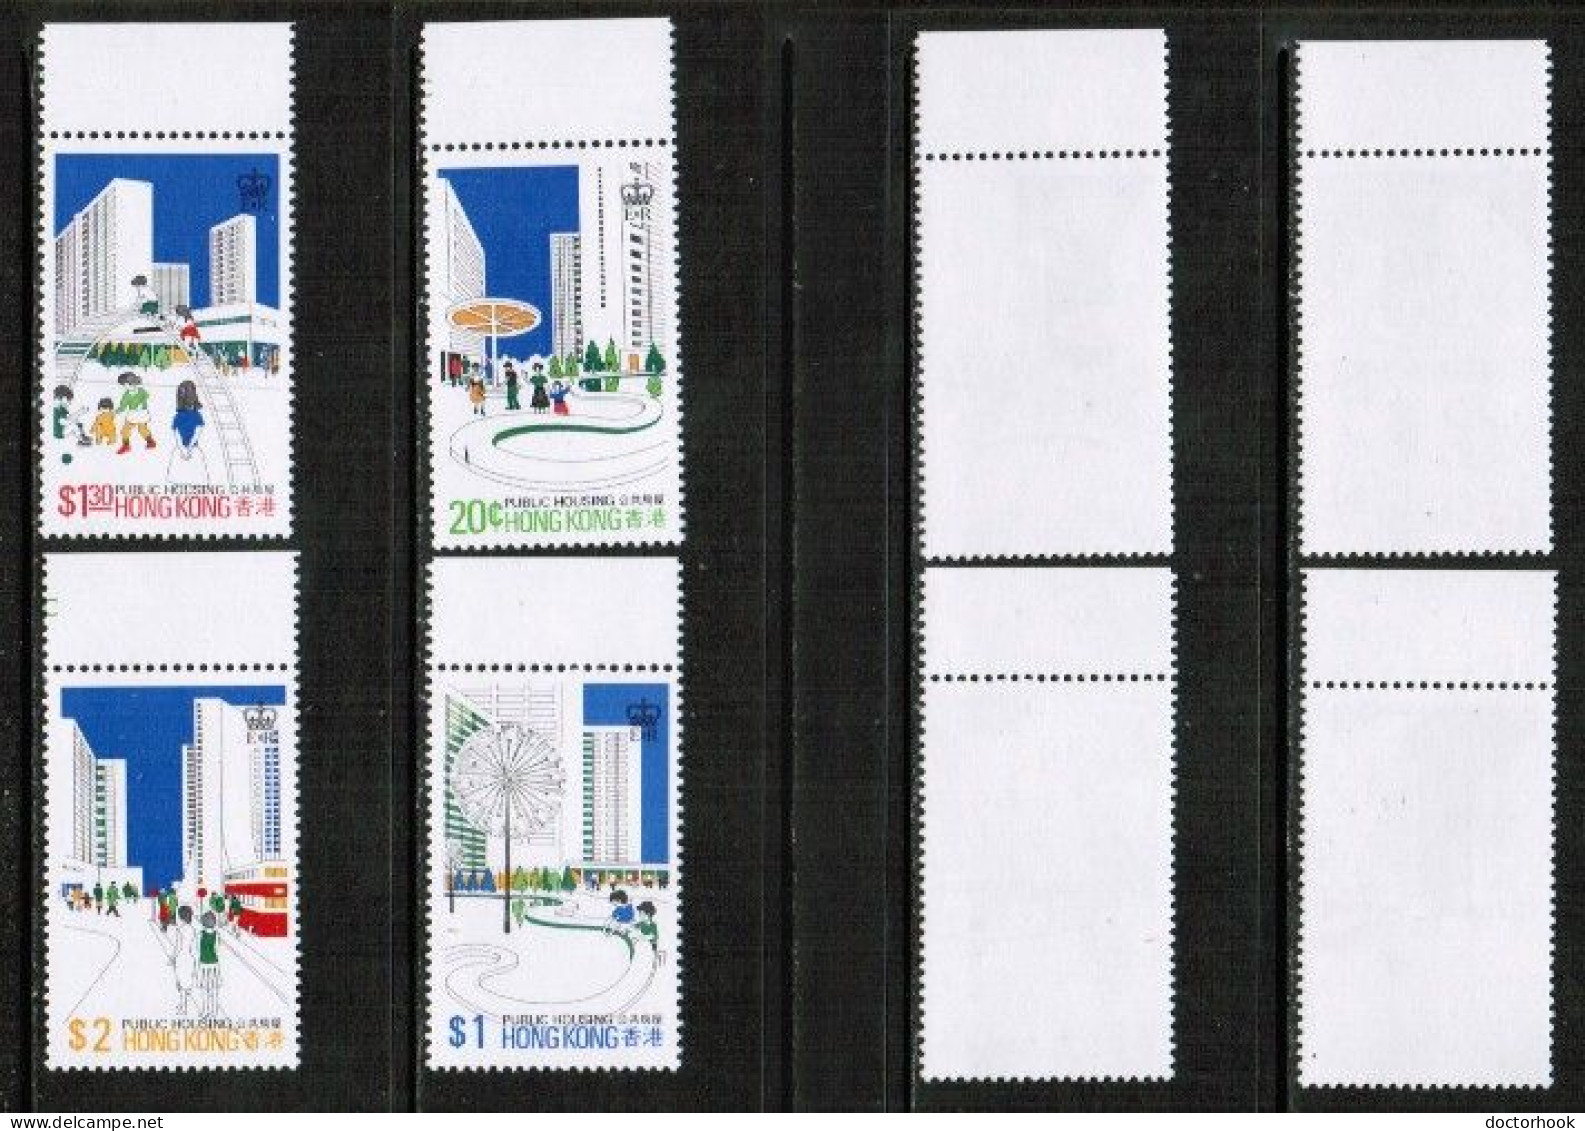 HONG KONG   Scott # 376-9** MINT NH (CONDITION AS PER SCAN) (Stamp Scan # 944-5) - Nuevos